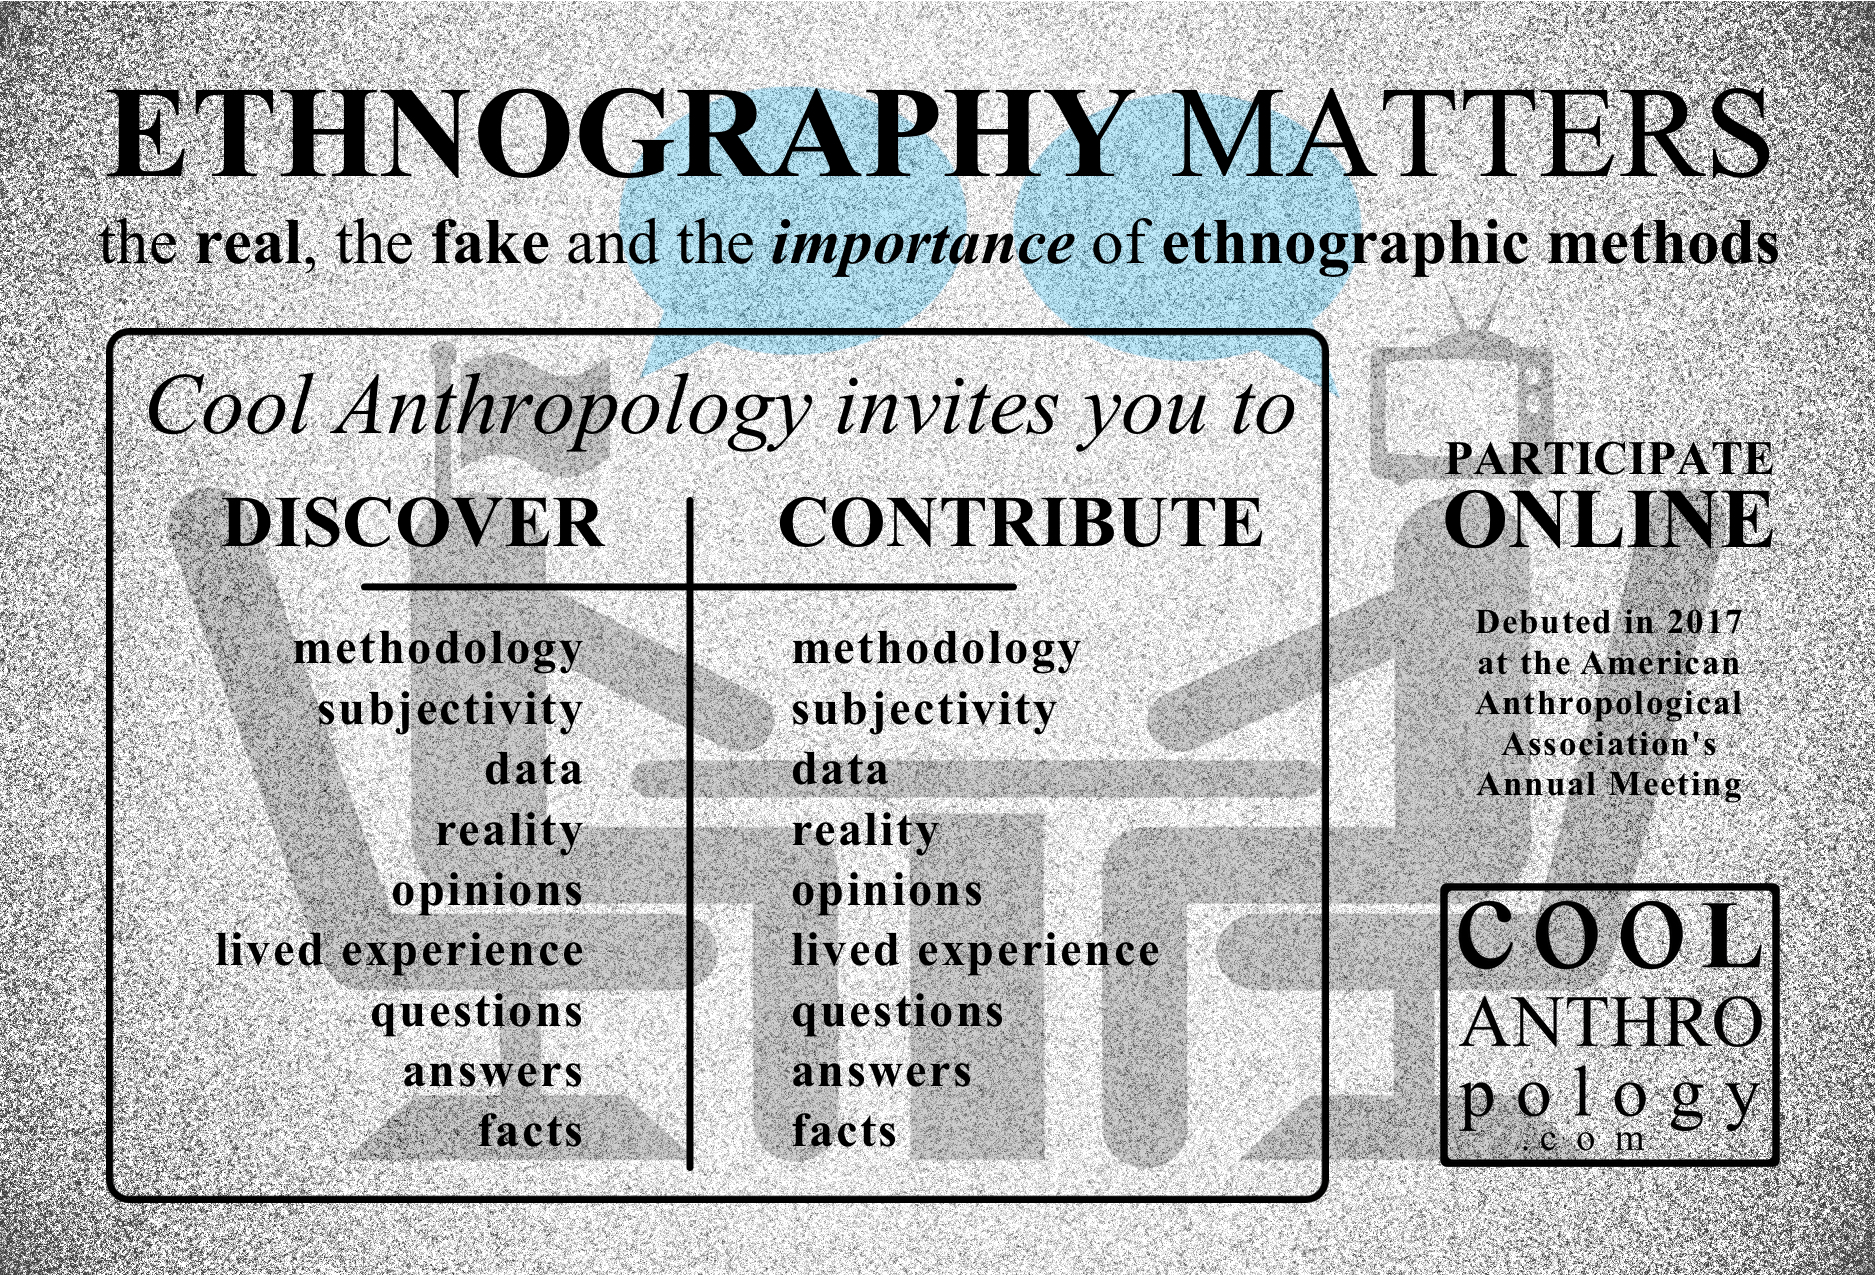 Participate in Ethnography Matters